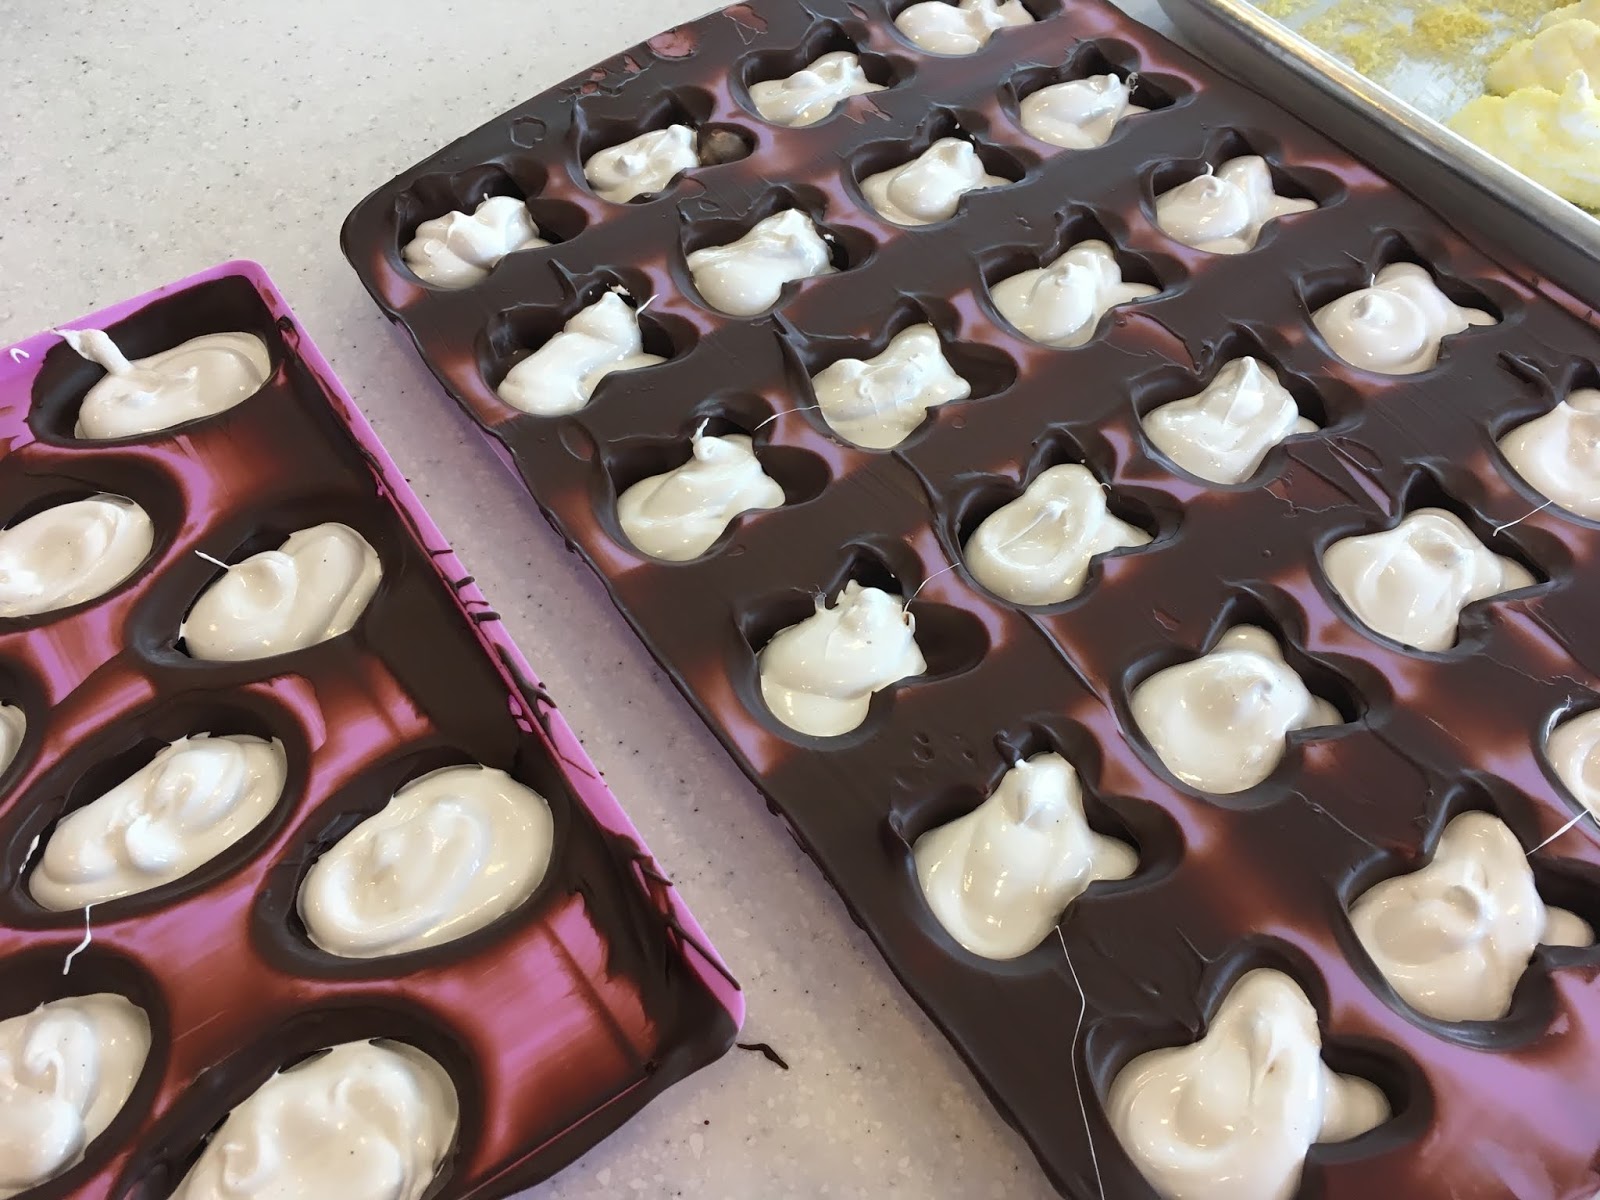 Successfully Gluten Free! : Chocolate Covered Homemade Marshmallows